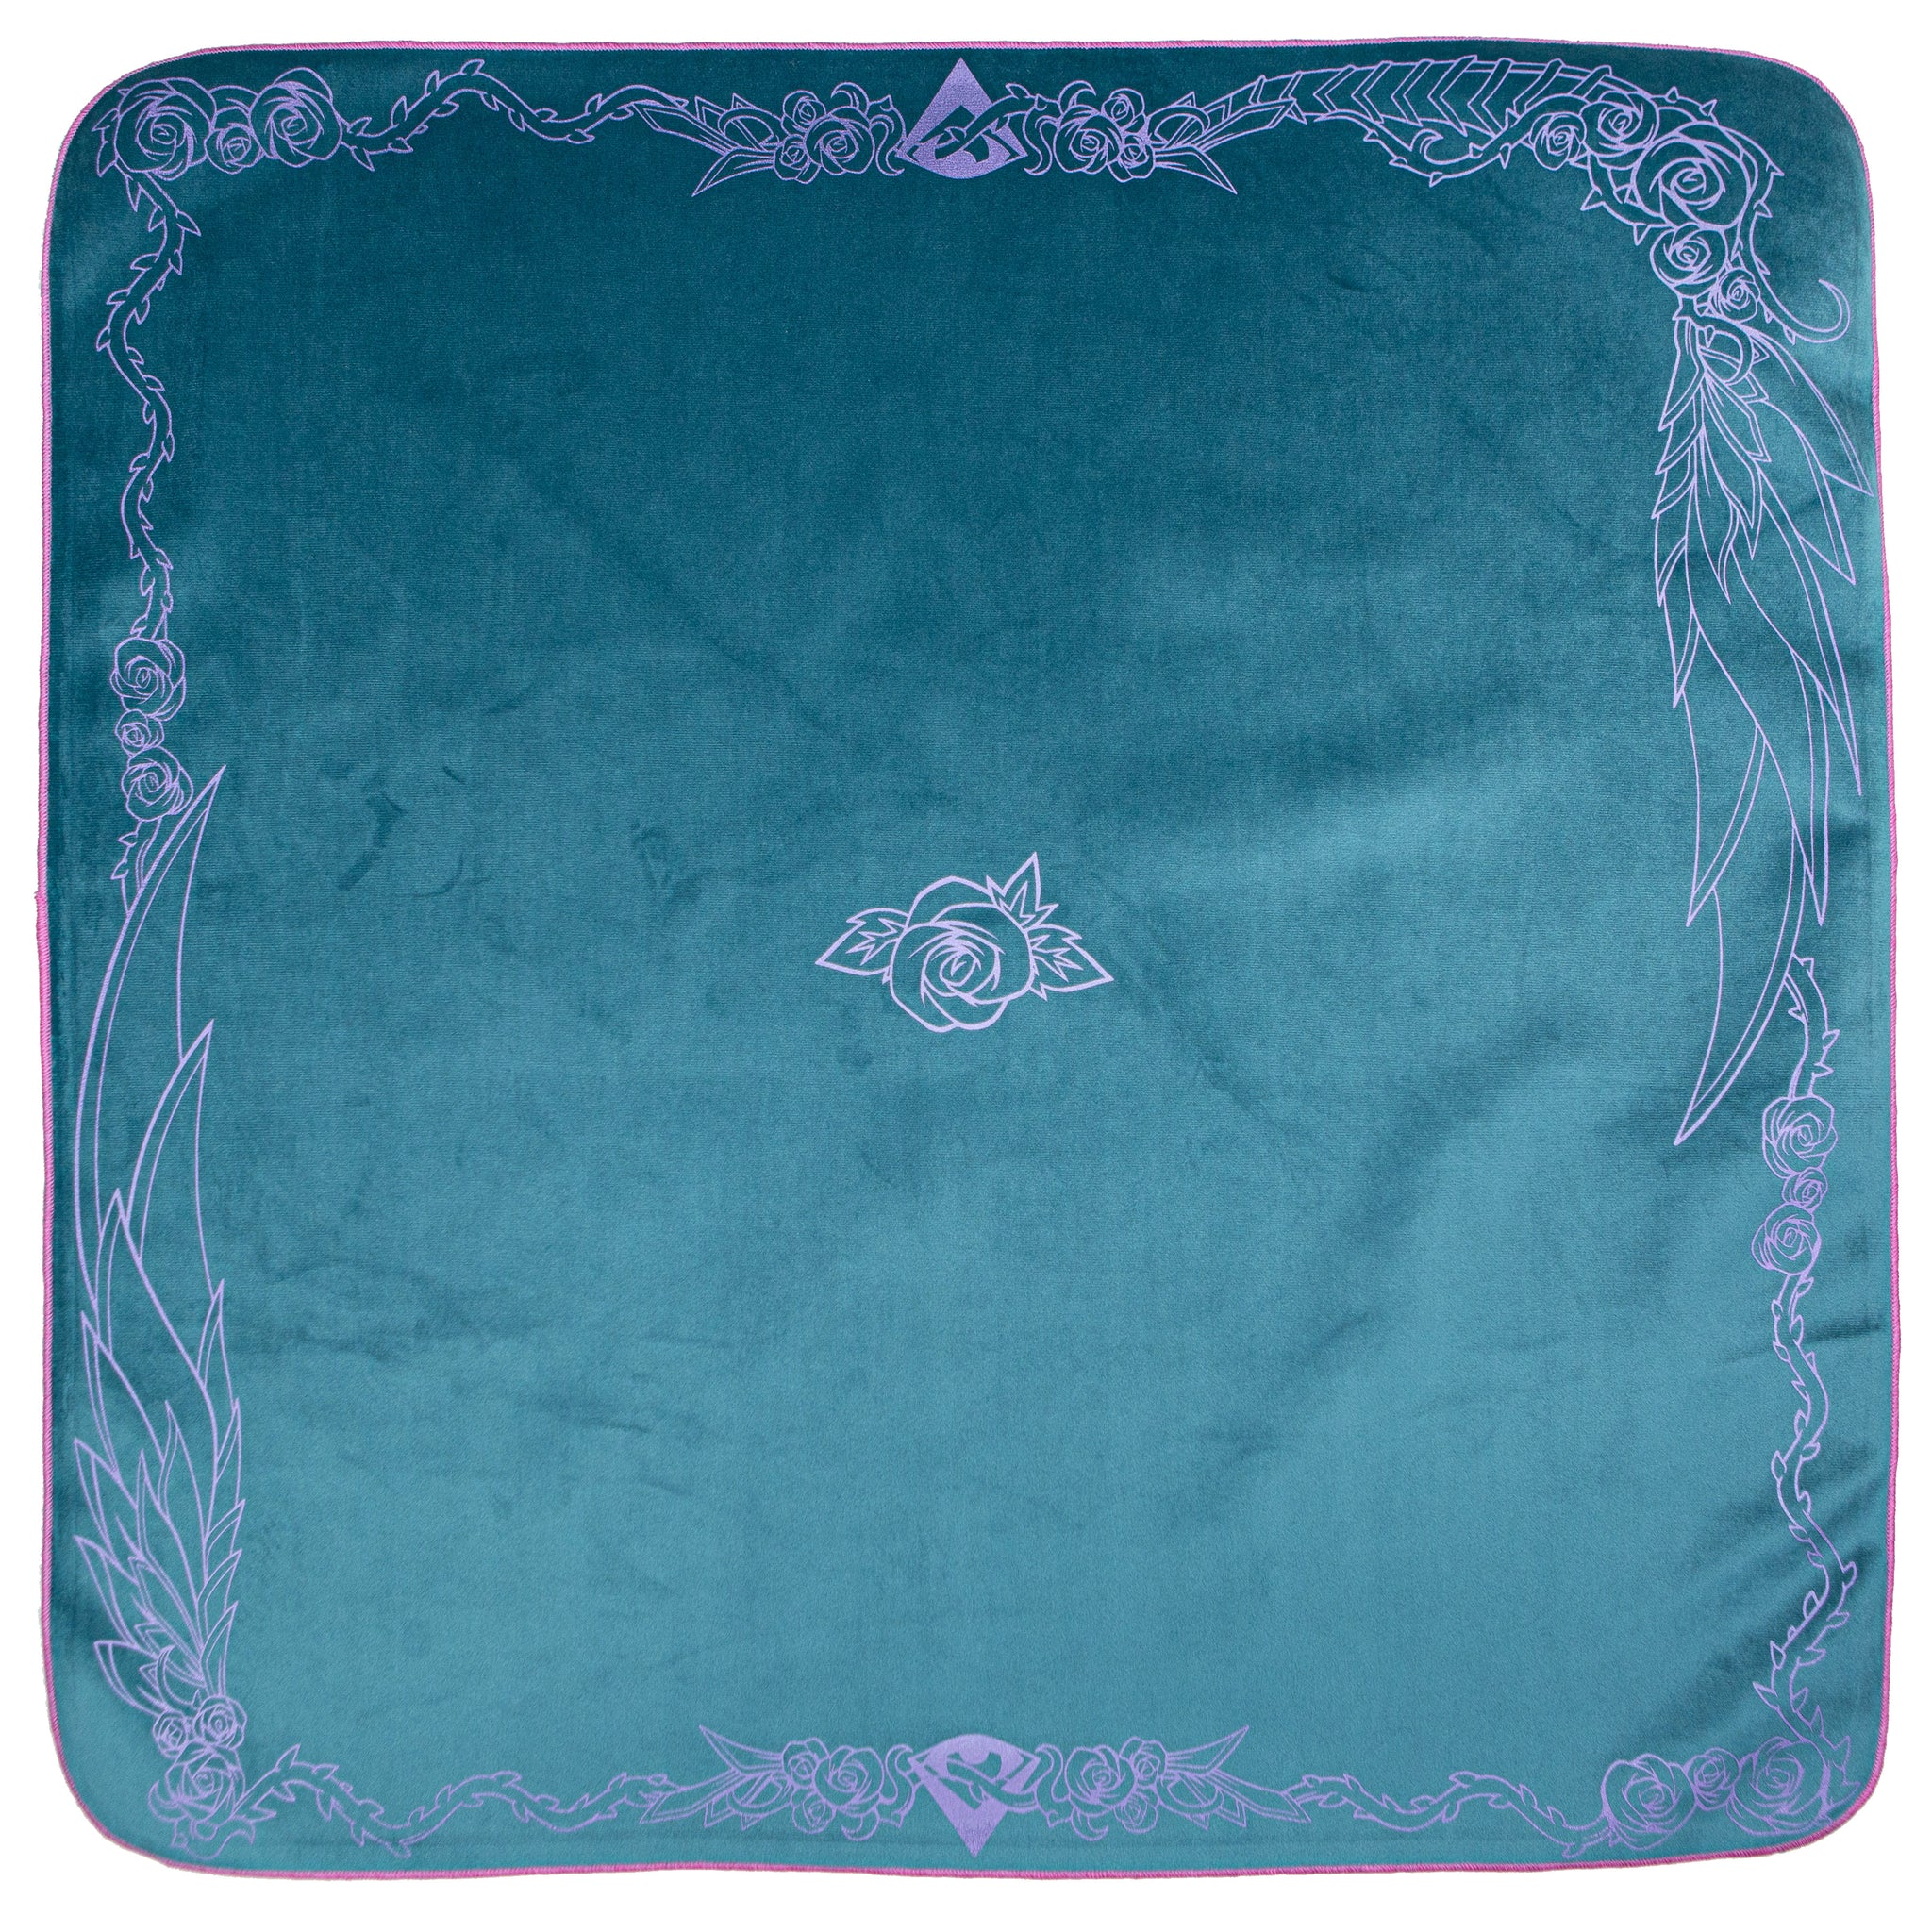 The Crimson Thorn Altar | Ultraglide Turquoise x Periwinkle Blossom